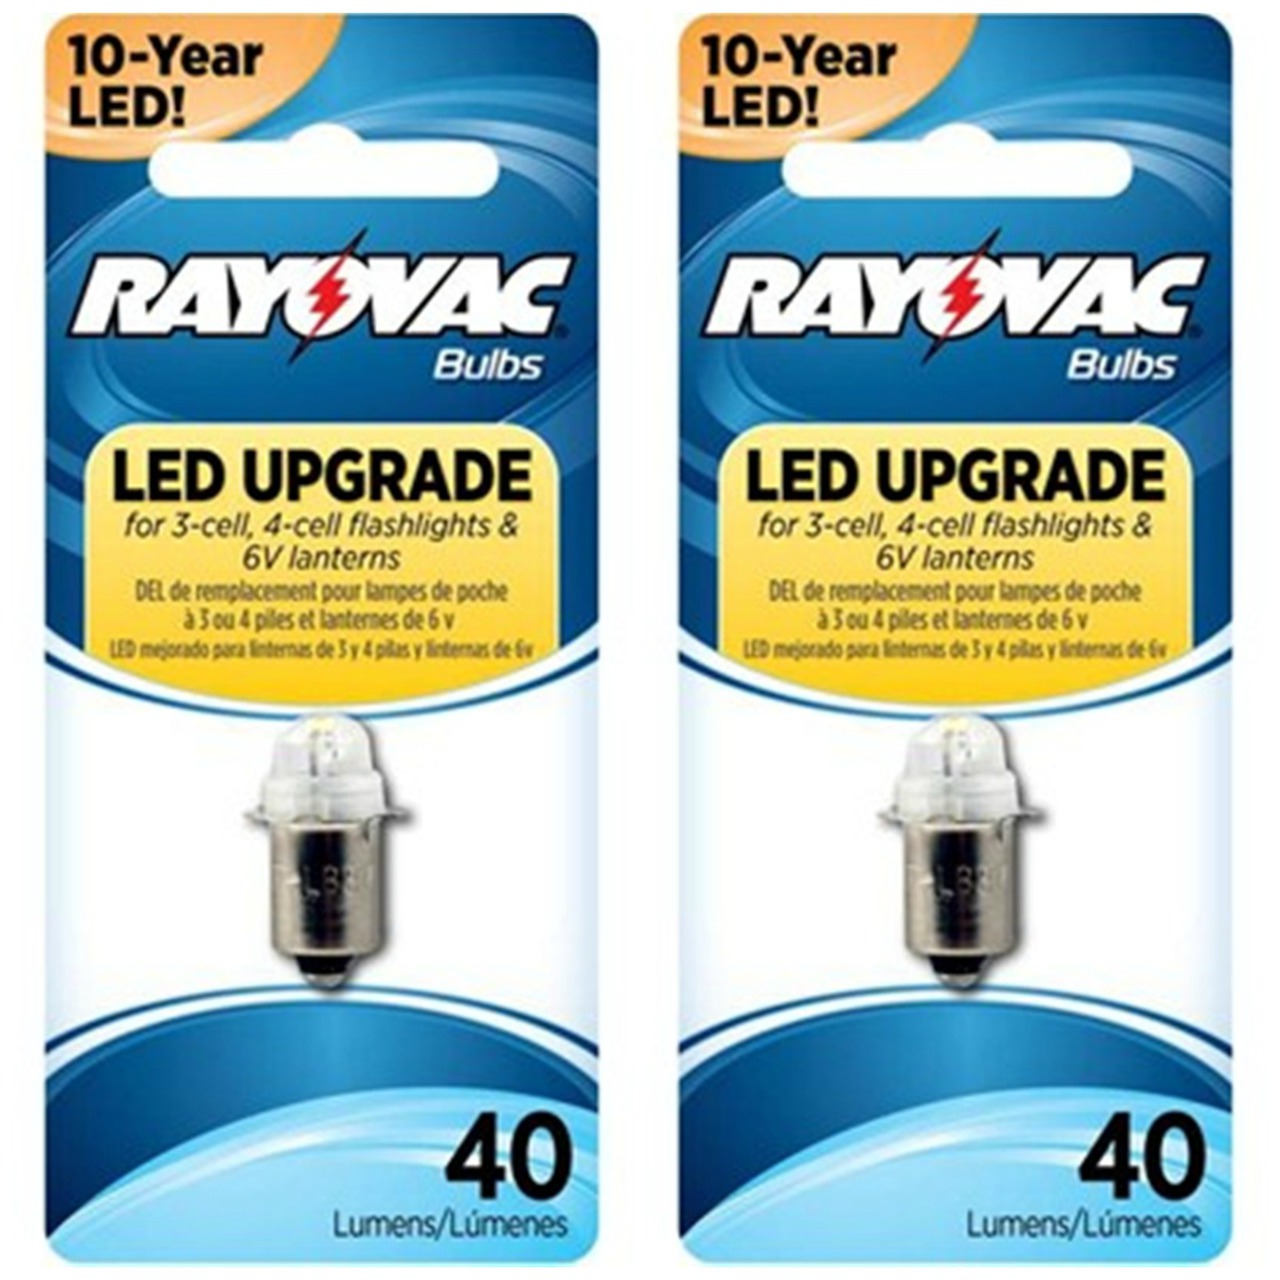 Rayovac LED Upgrade Bulb For 3-Cell  4-Cell Flashlights And Lanterns 4V6VLED -2 Pack + FREE SHIPPING!